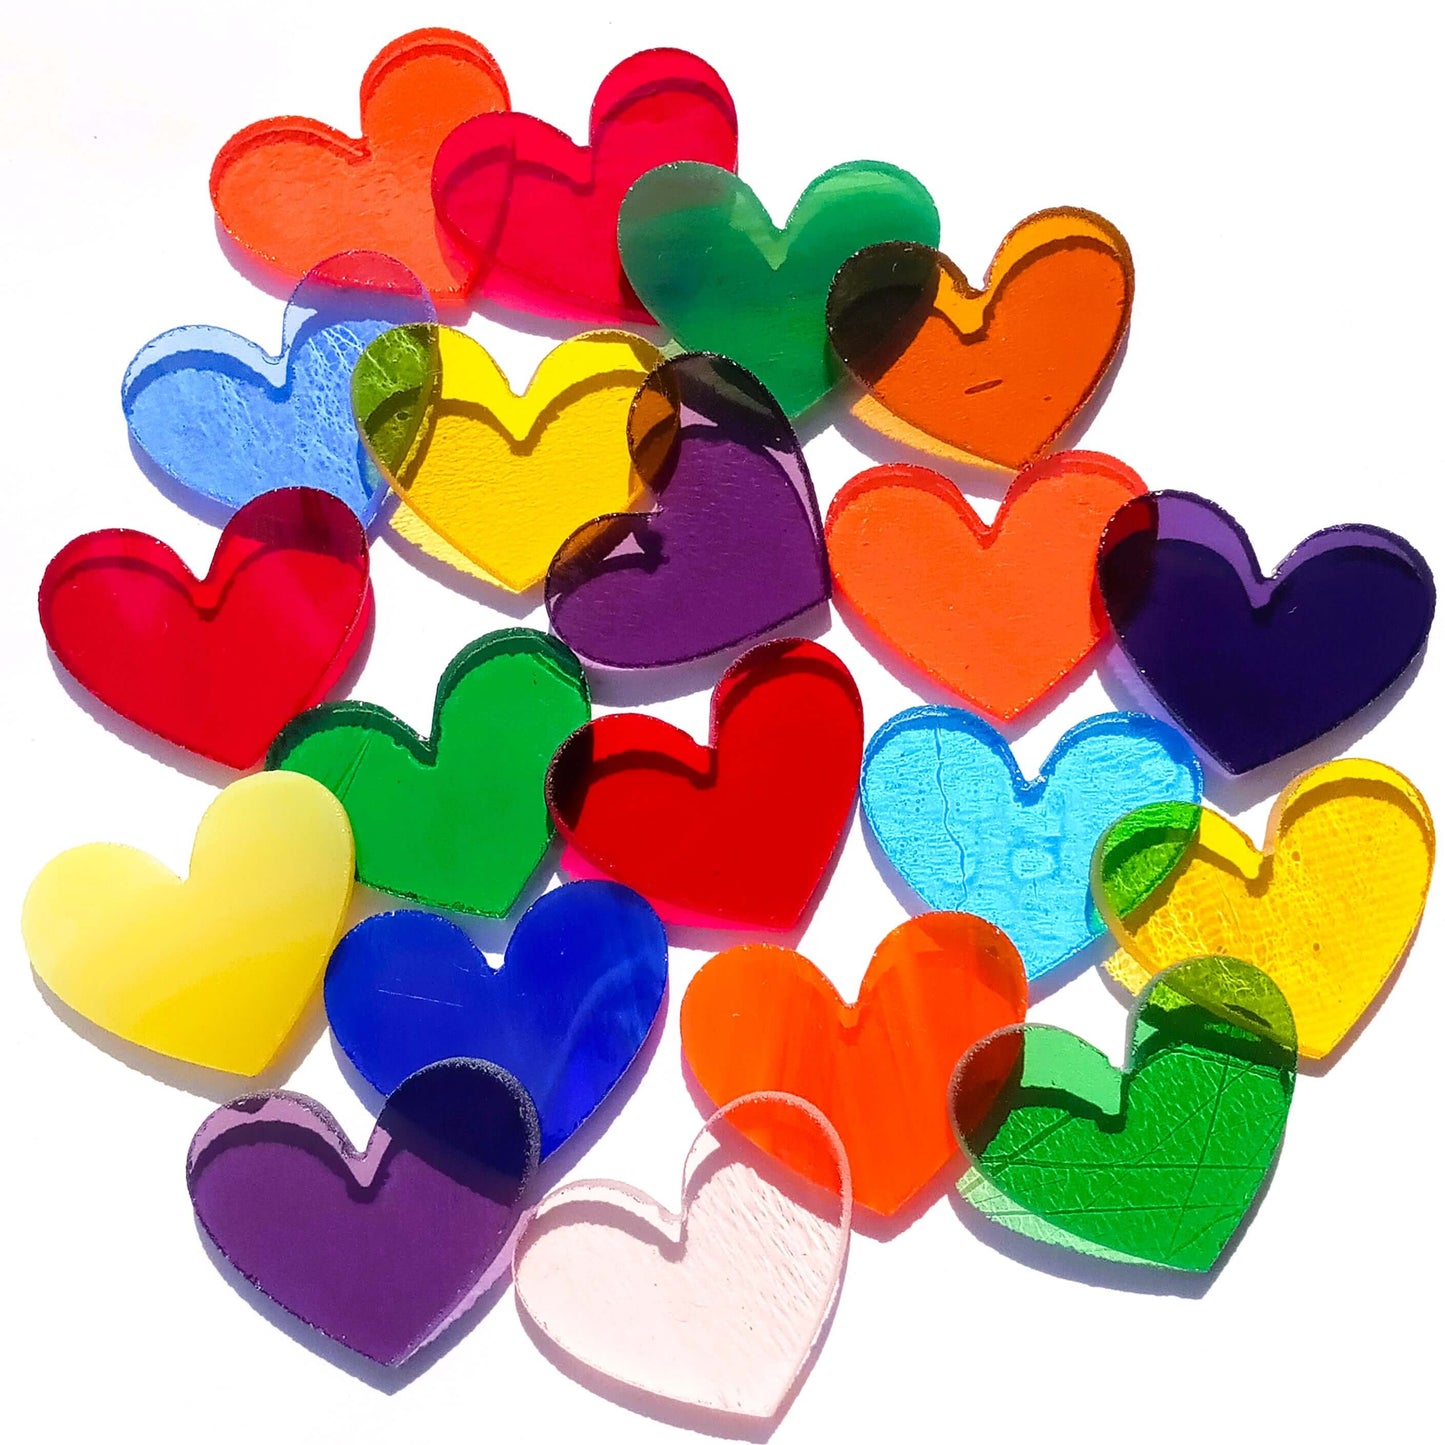 Precut Stained Glass Hearts, Assorted Colors, 1 inch Glass Hearts for Mosaics, Jewelry, Stained Glass